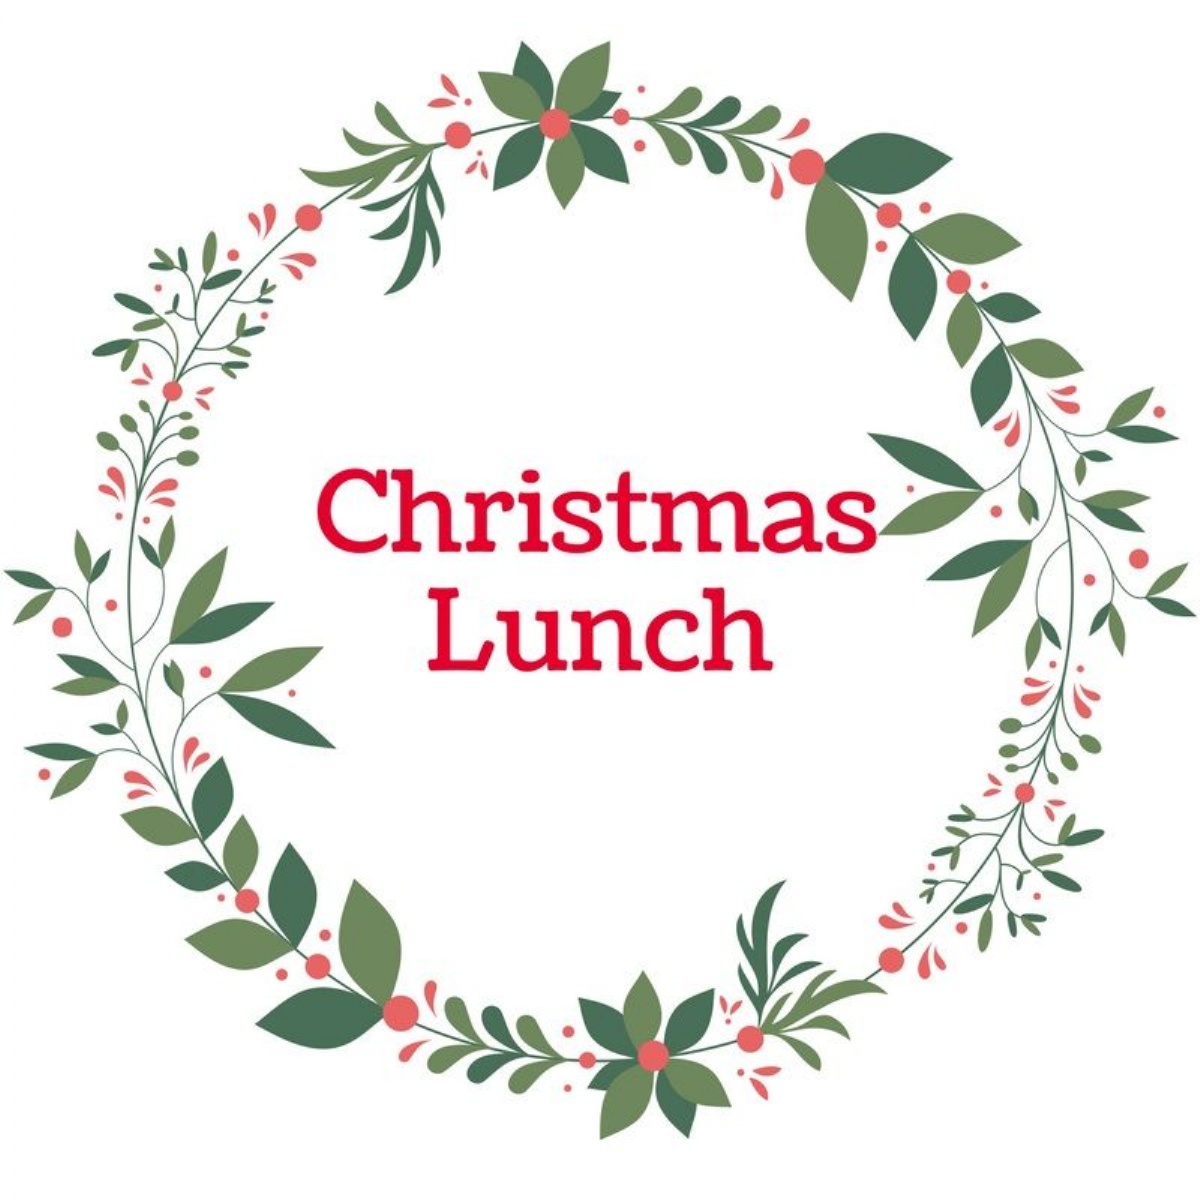 South Lake Primary School Christmas lunch orders are now closed